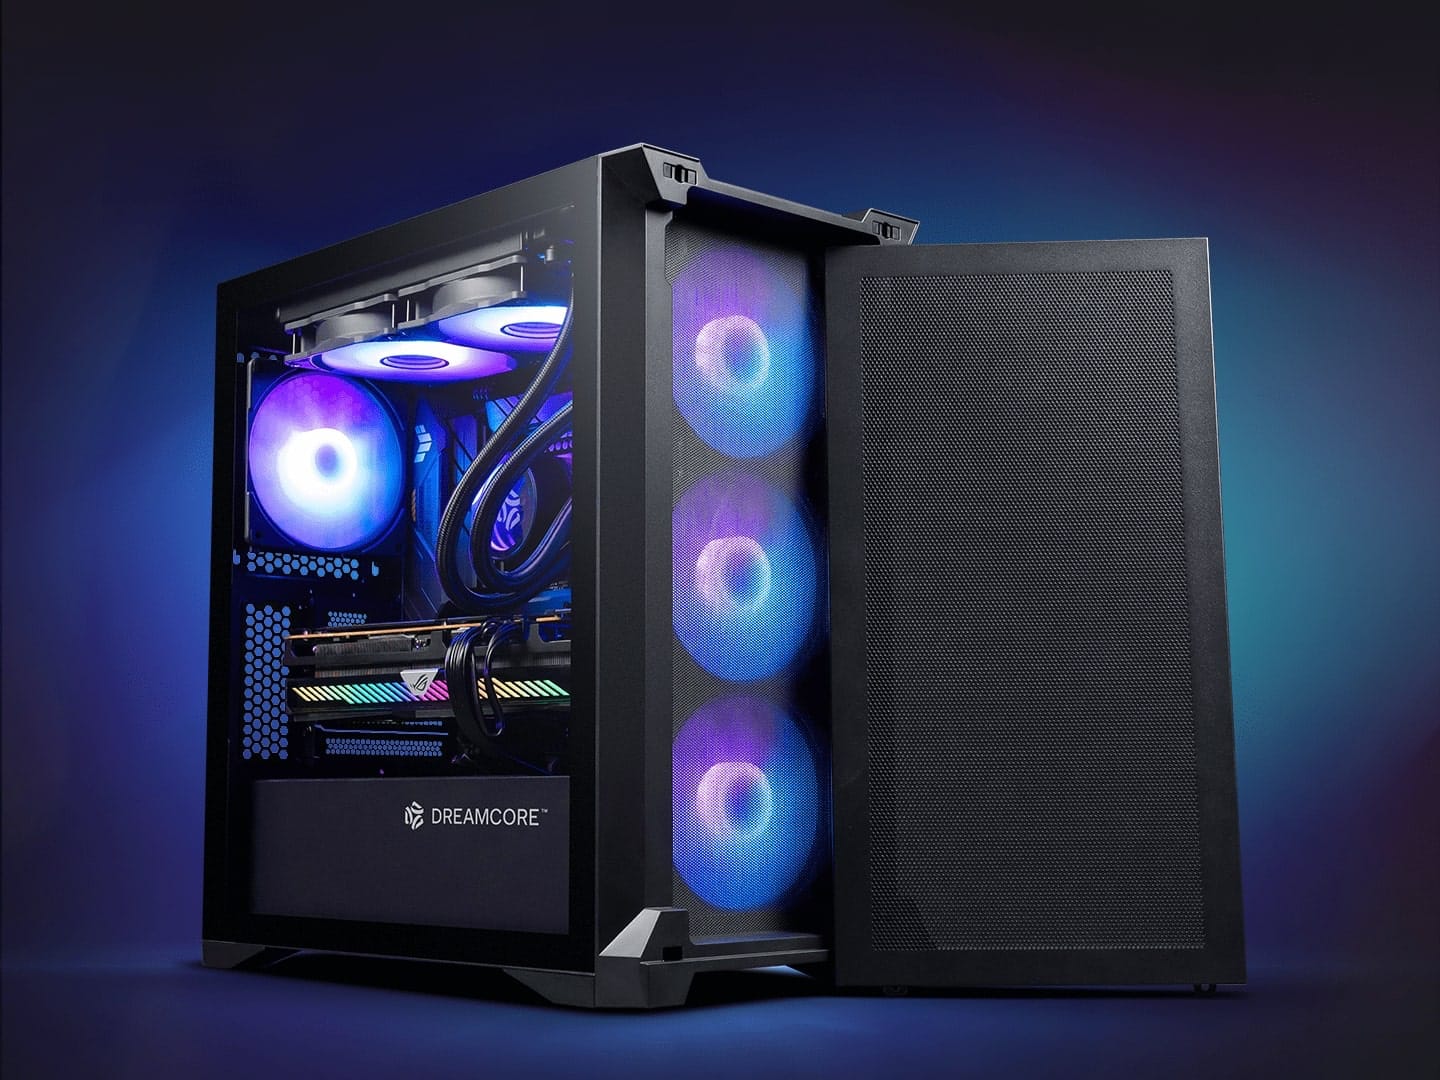 Dreamcore launches redesigned Ghost PC and ElementOne monitors in Singapore